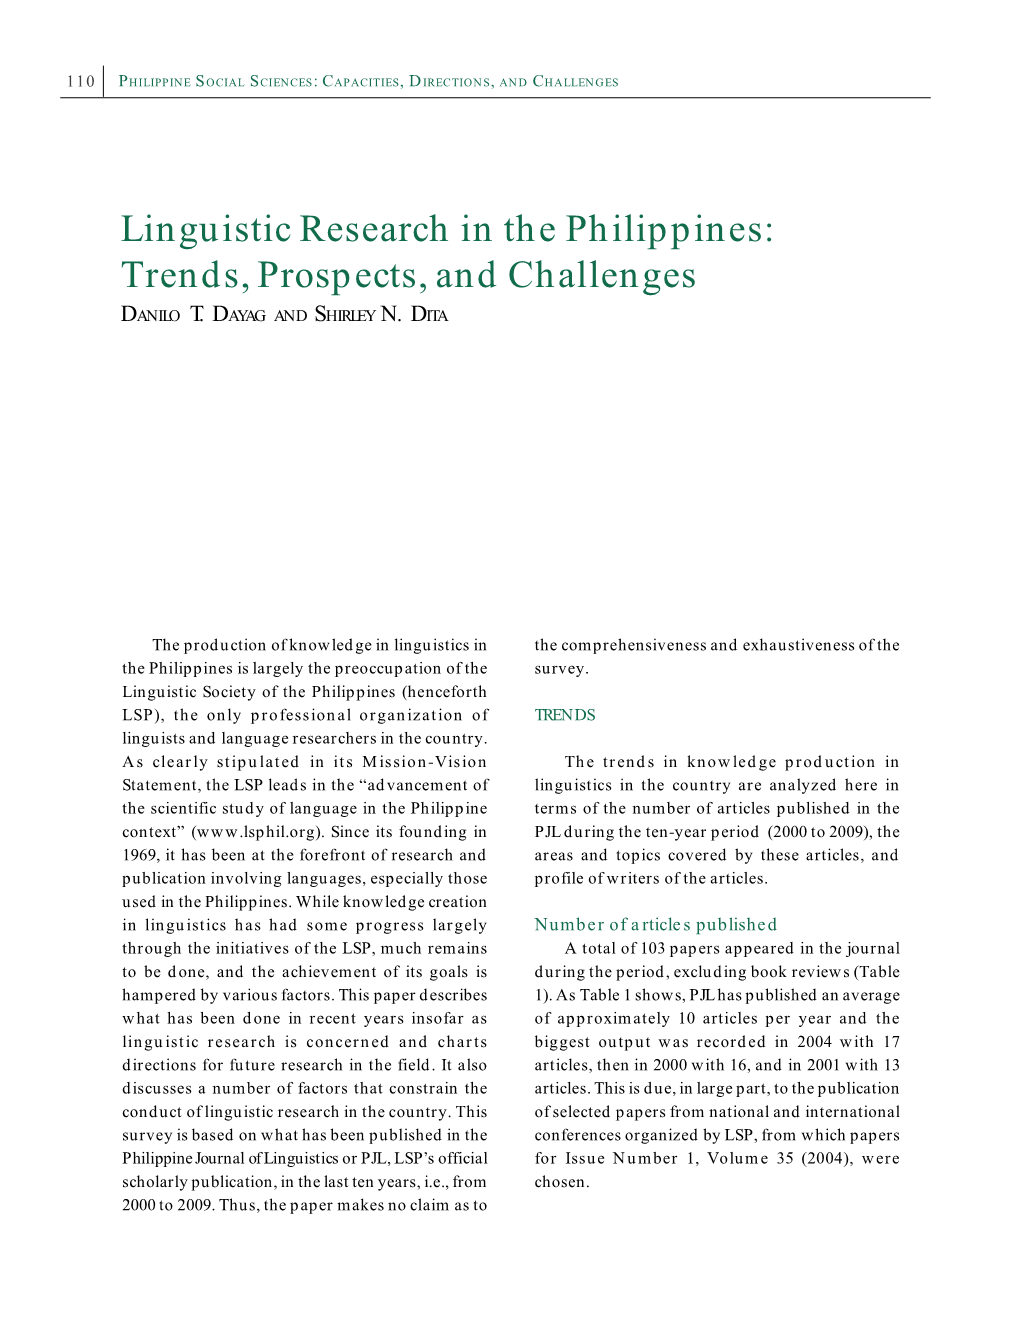 Linguistic Research in the Philippines: Trends, Prospects, and Challenges DANILO T